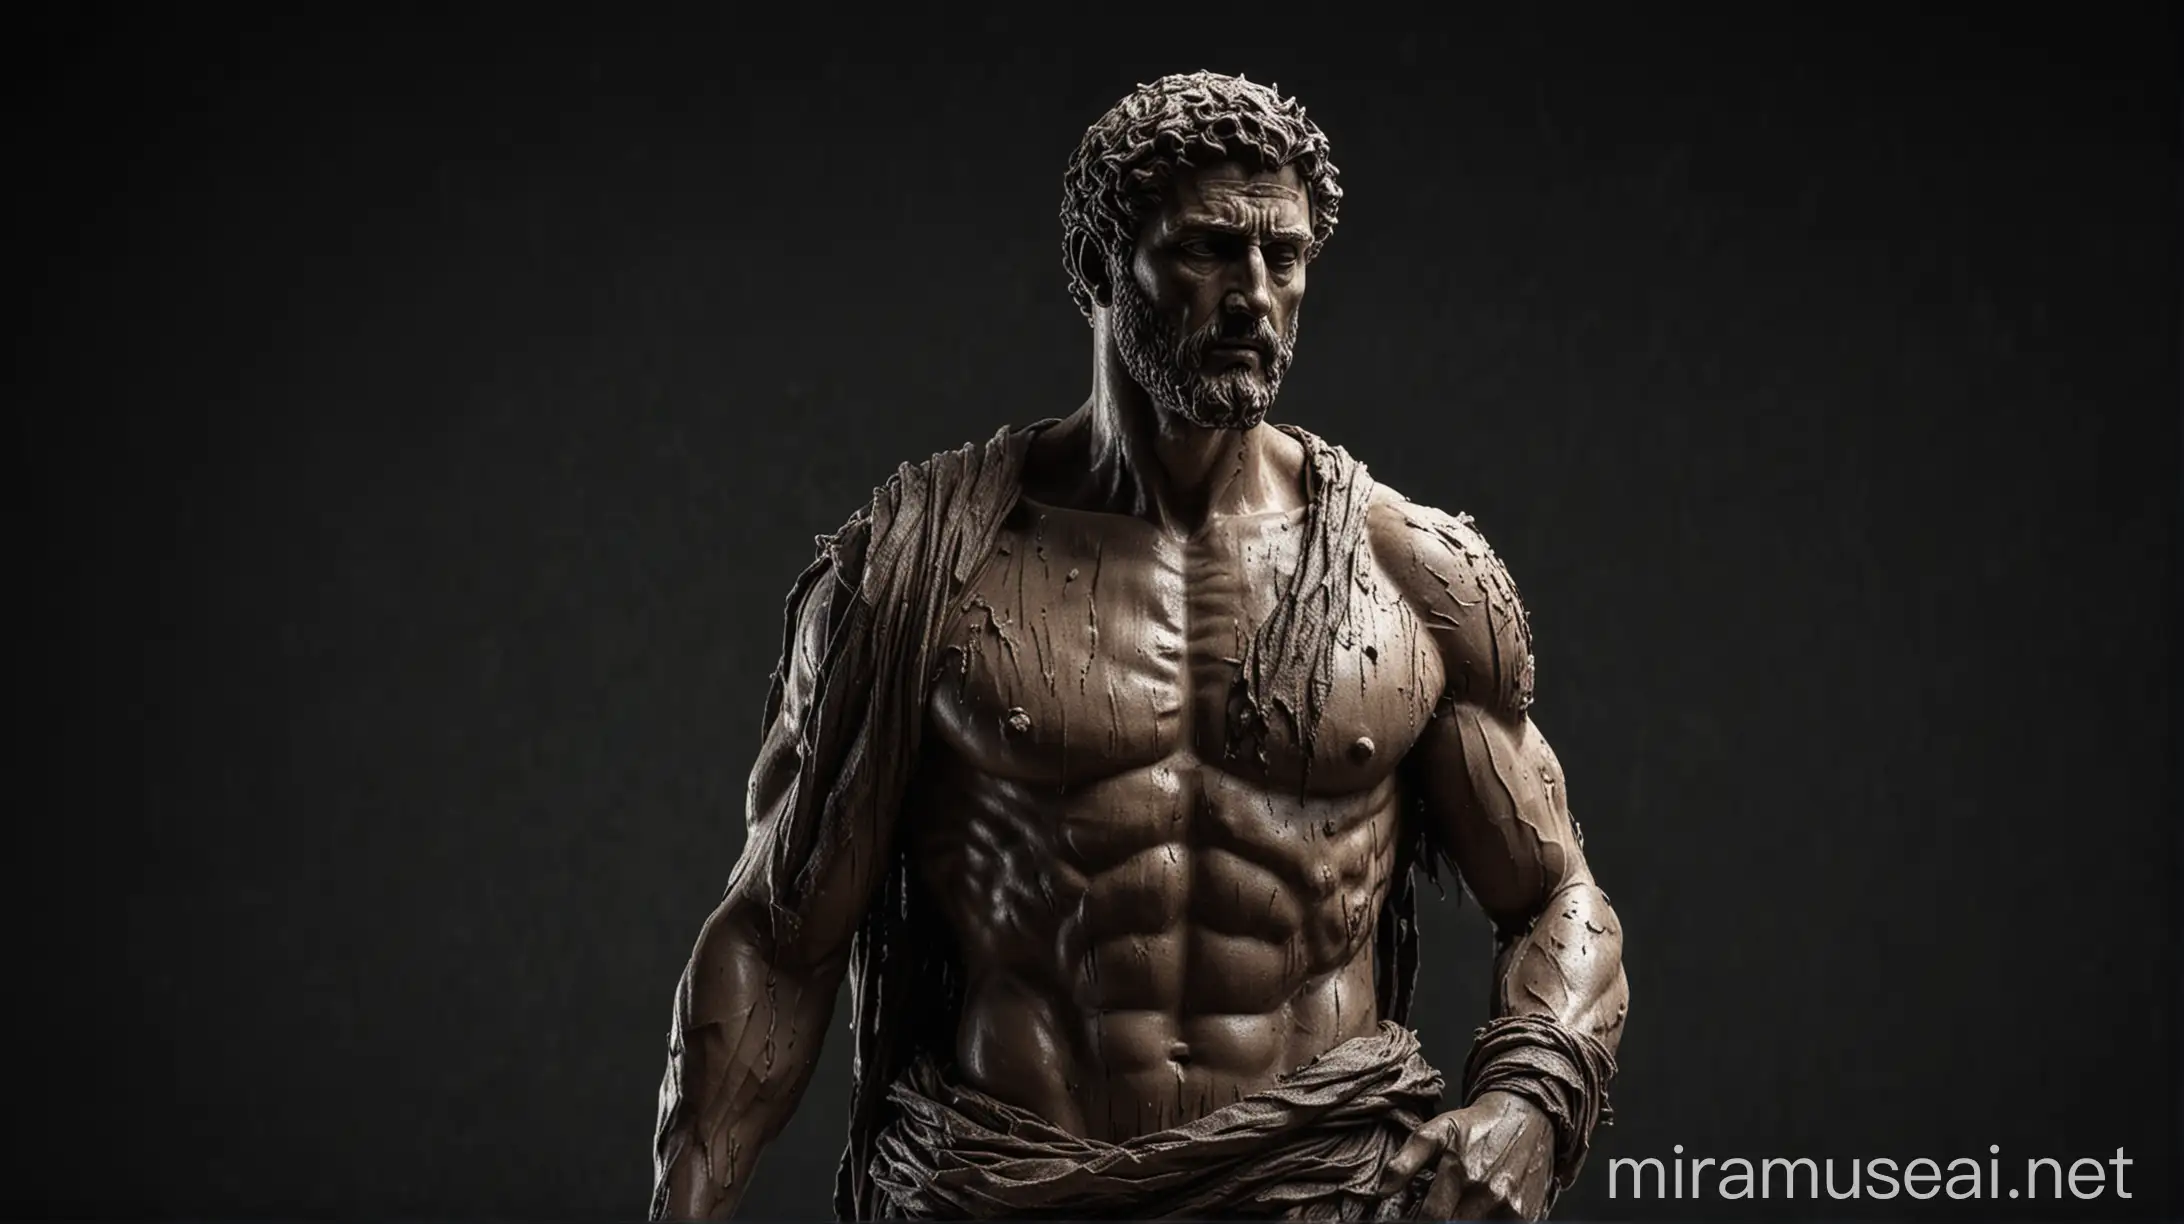 Stoic man statue, strong shredded body, dynamic lighting against  a dark background, stoicism era time concept statue image 